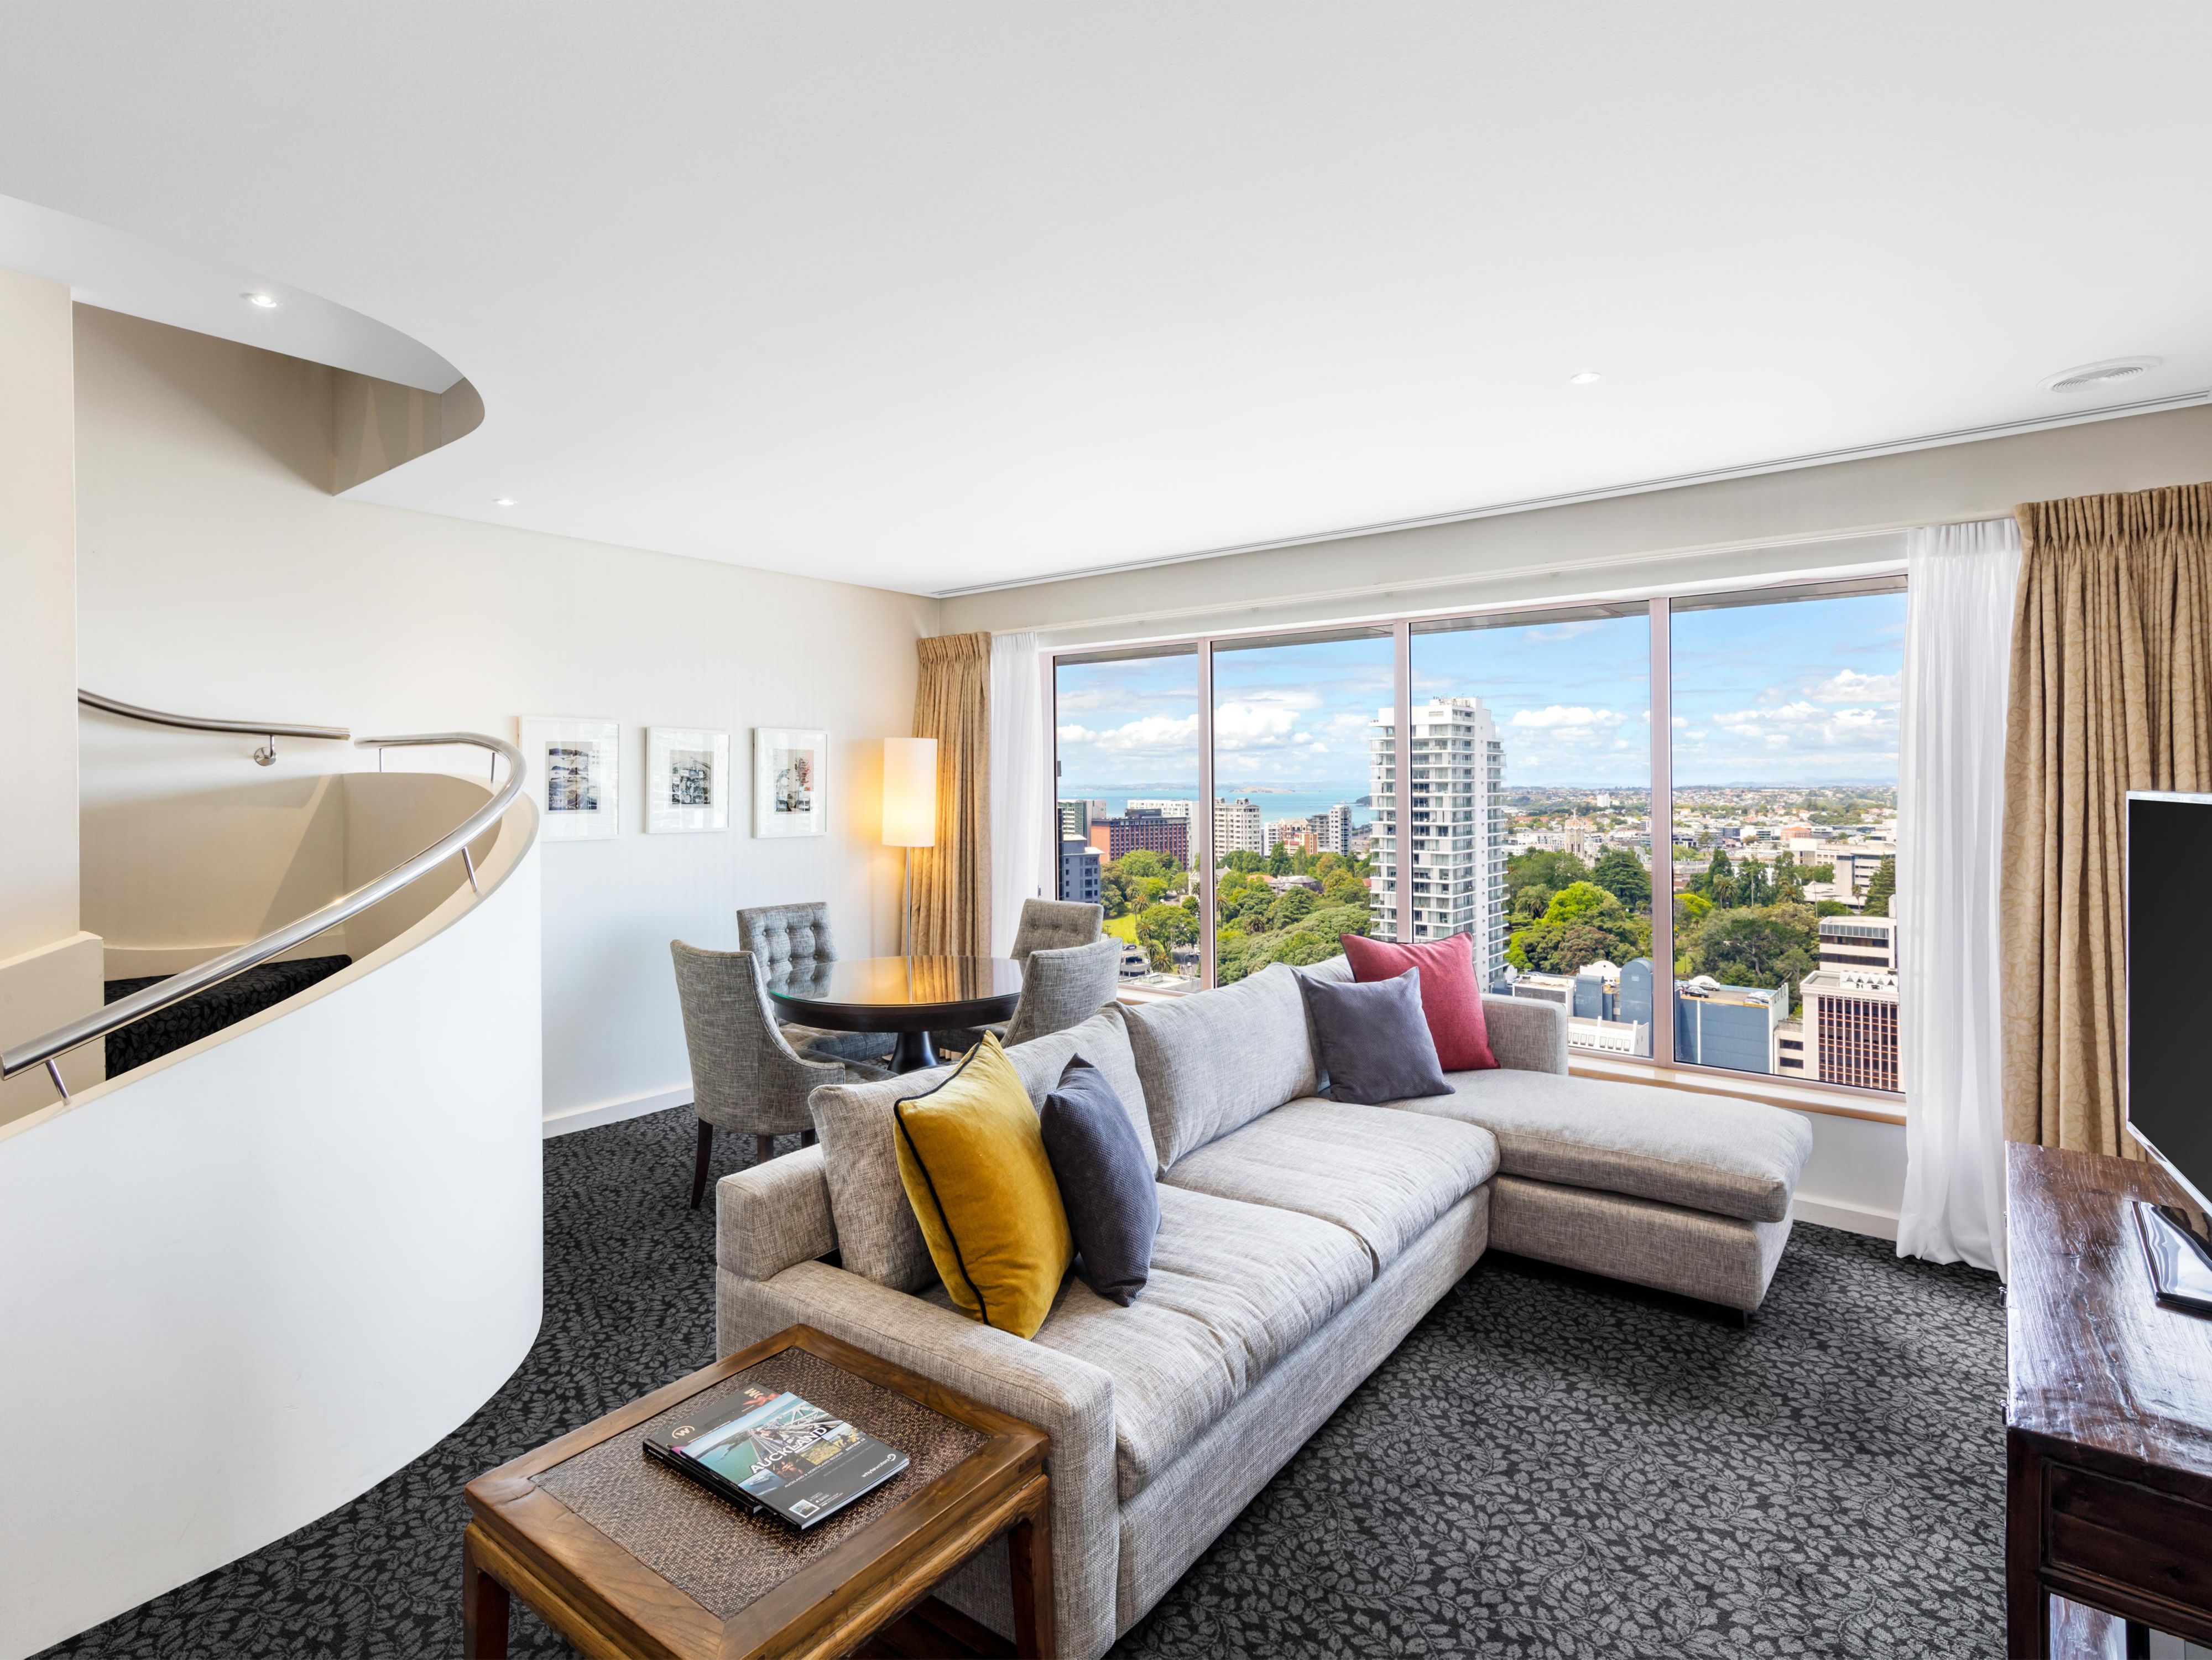 Relax and rejuvenate in Auckland's multi level apartment. Spread out in the two levels, enjoy the varied city and harbour views from the balcony. Relax in the spacious spa baths or unwind and indulge with evening beverages and canapés in the Executive Lounge.